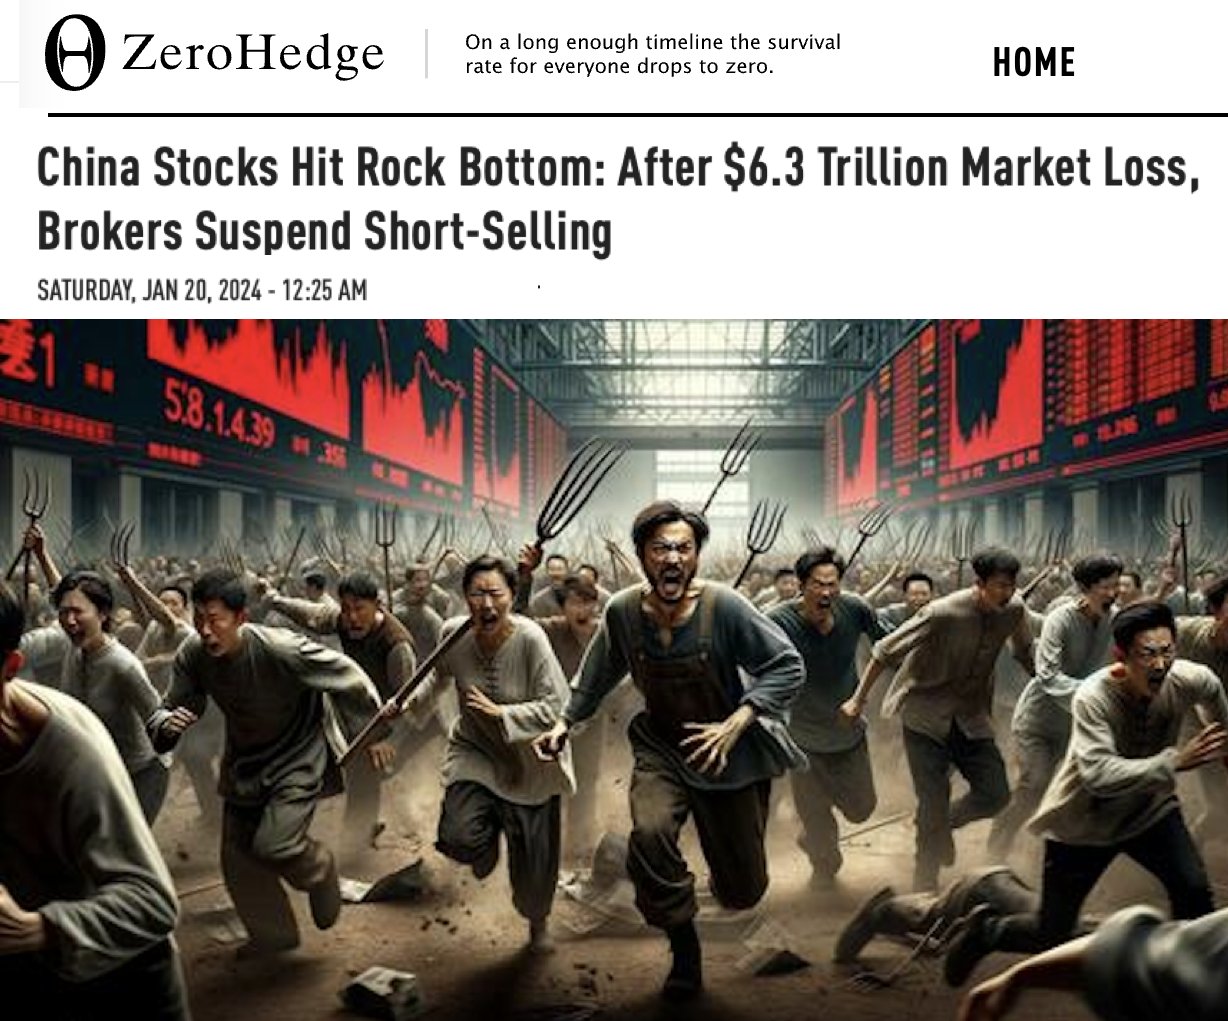 Indo-Pacific News - Geo-Politics & Defense News on X: "#China Stocks Hit  Rock Bottom: After $6.3 Trillion Market Loss, Brokers Suspend Short-Selling  Amid 'snowball derivative liquidations', China's stock market is falling  faster